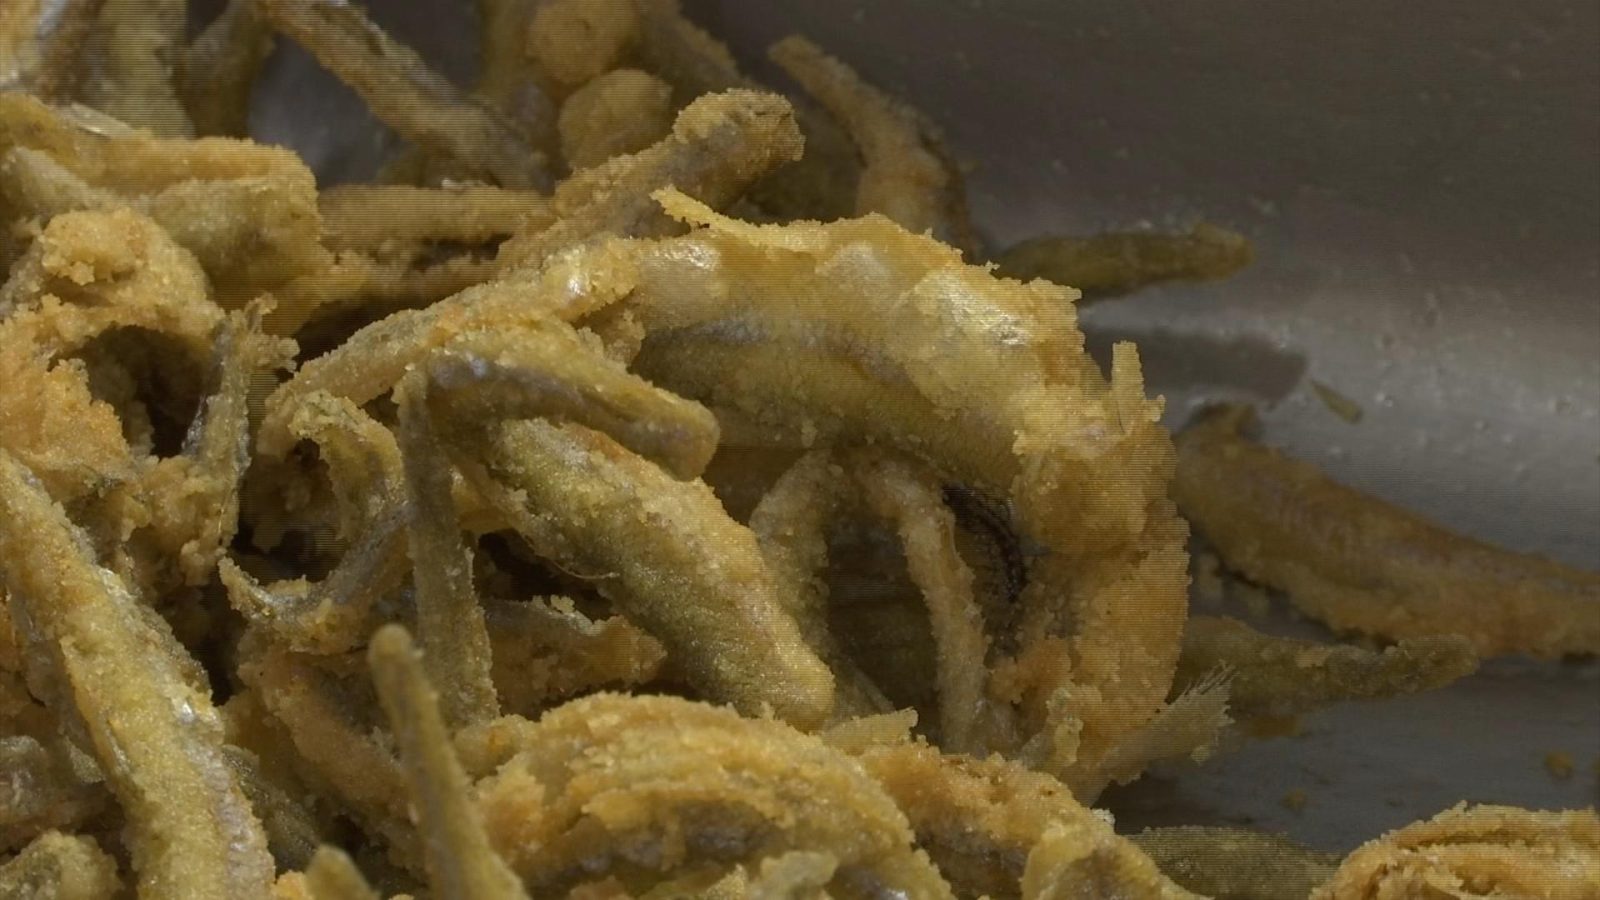 Annual Smelt Fry Fundraiser to Aid Good Causes Starts on Wednesday